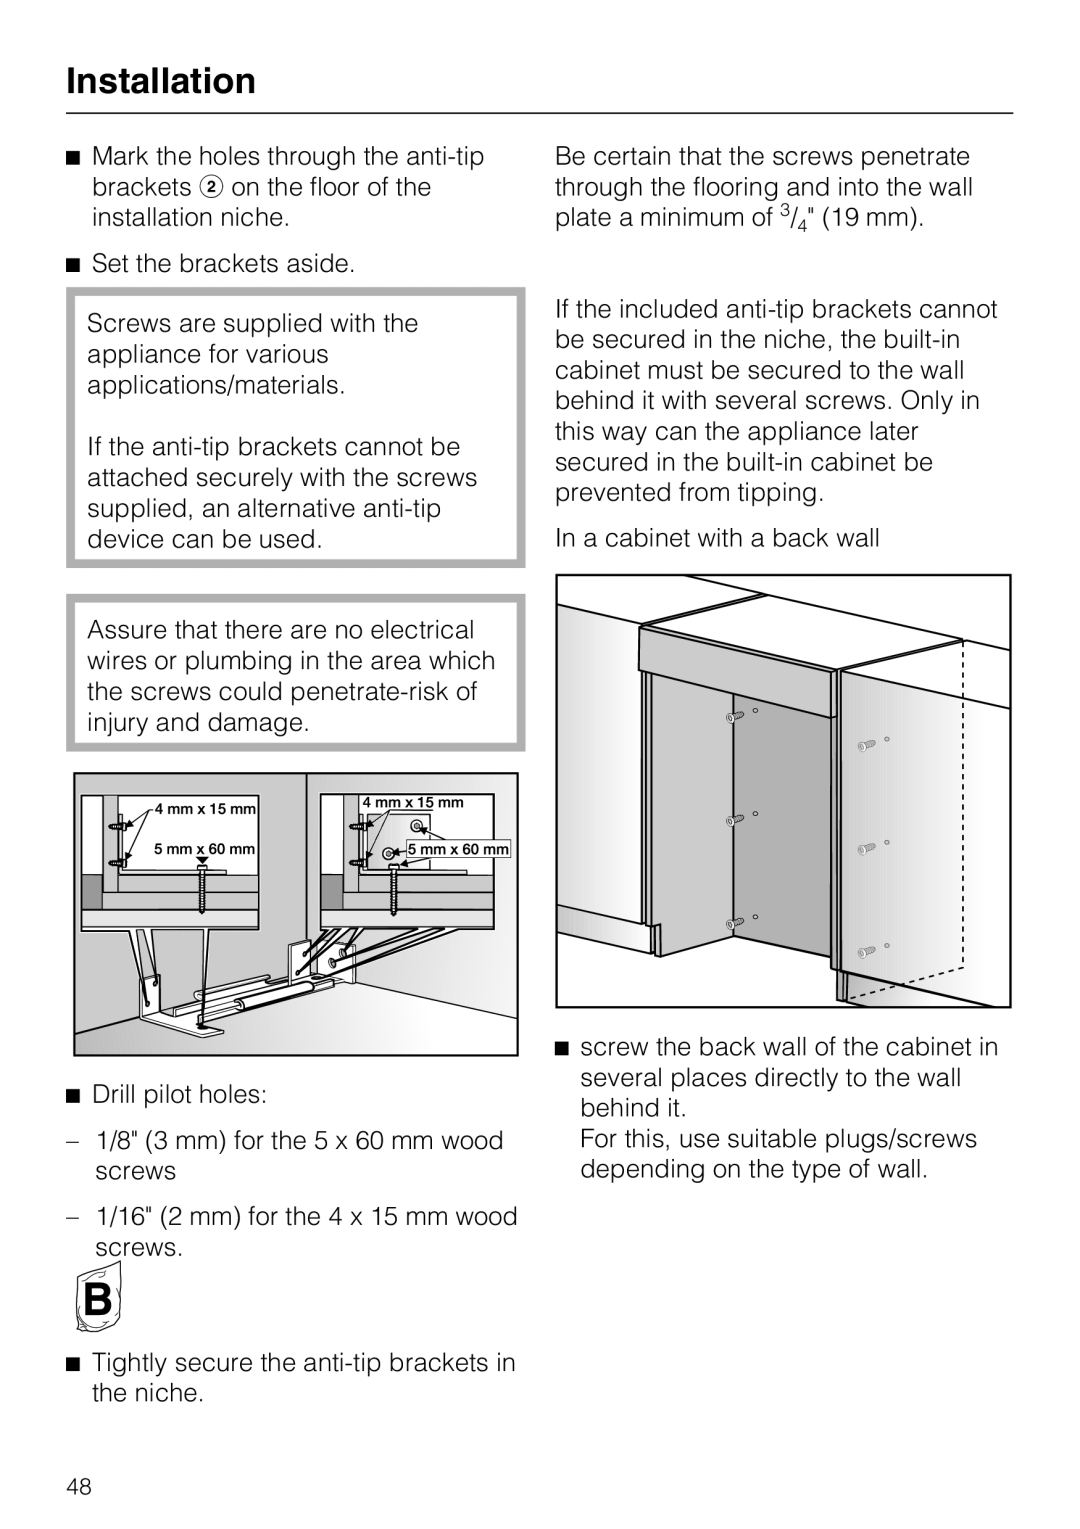 Miele KWT 1601 SF, KWT 1611 SF installation instructions Installation, Set the brackets aside 